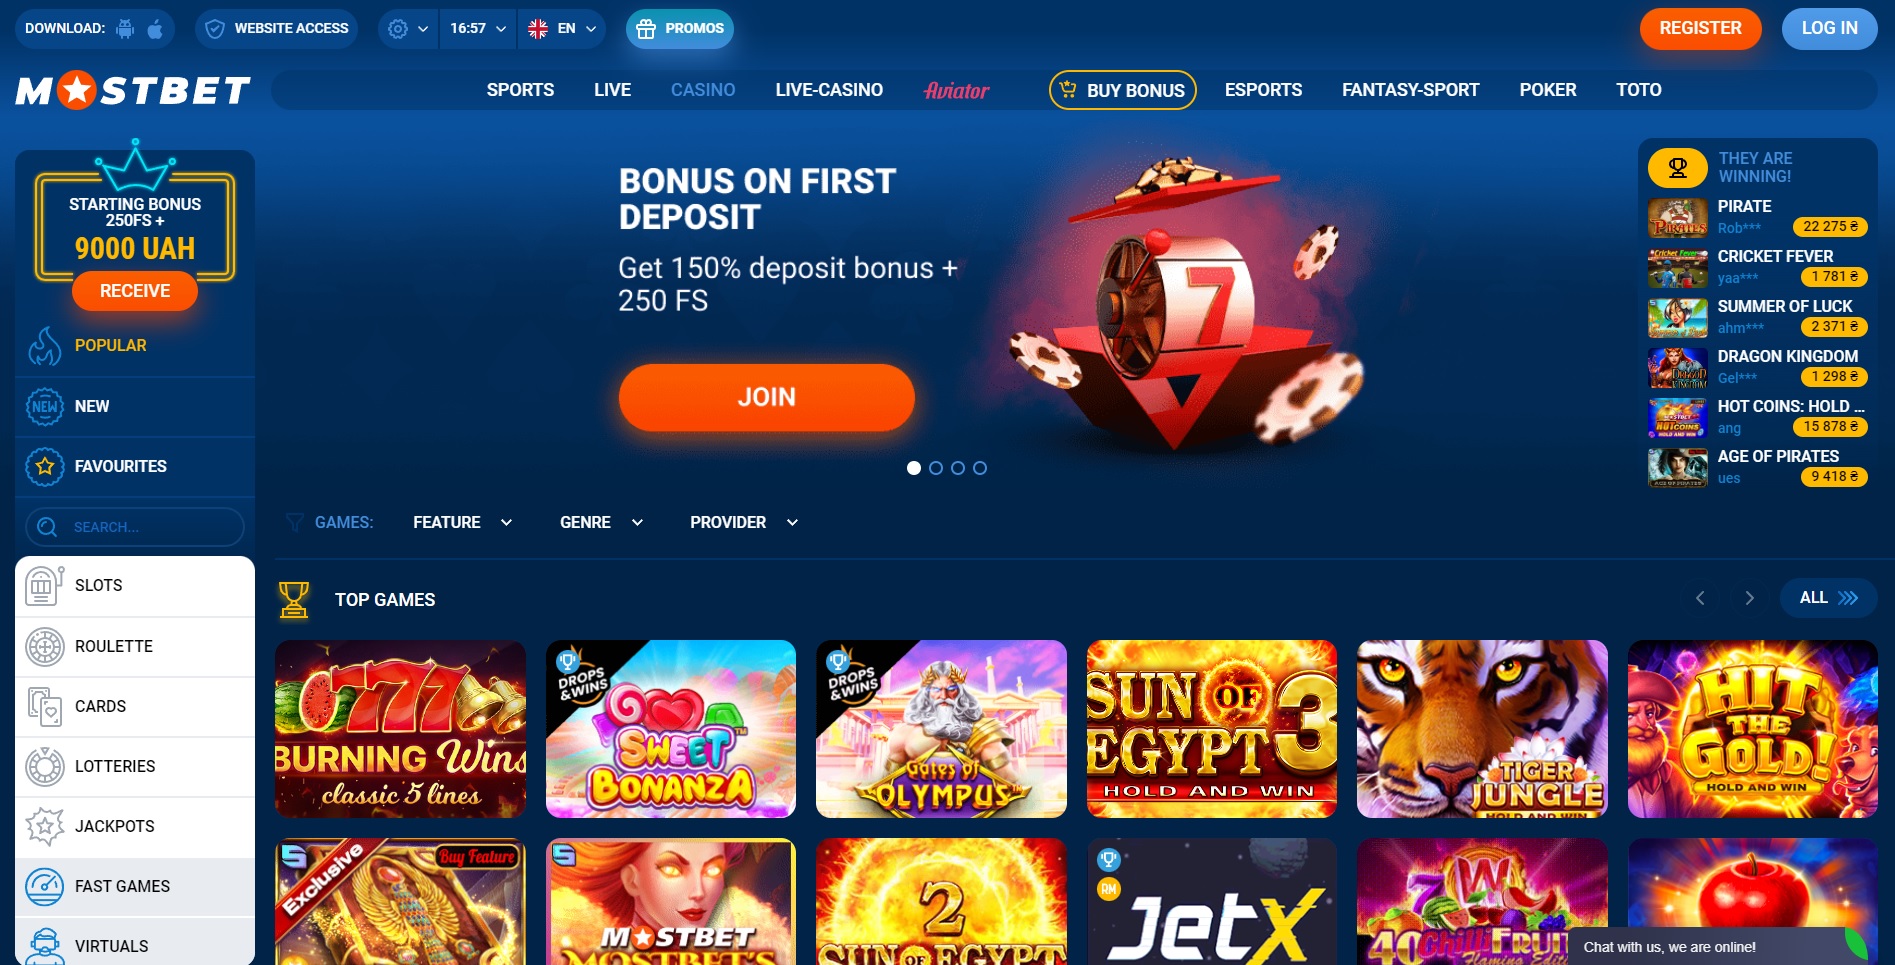 Mostbet casino and sport betting